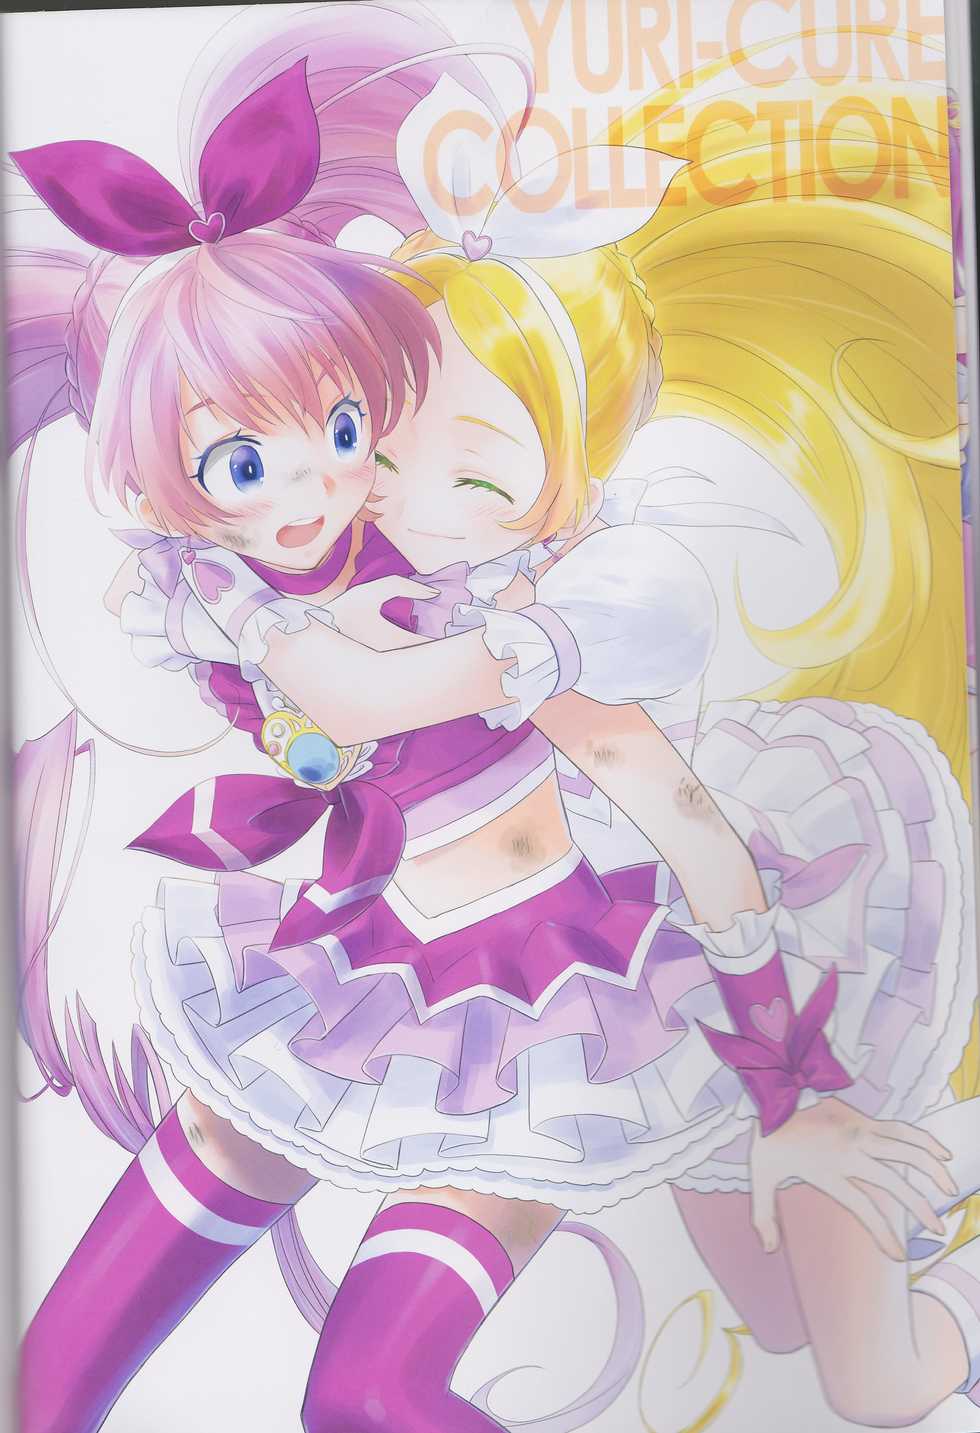 (Rainbow Flavor 12) [Sweet Pea (Ooshima Tomo)] Yuri Cure Collection Soushuuhen (Precure Series) - Page 4